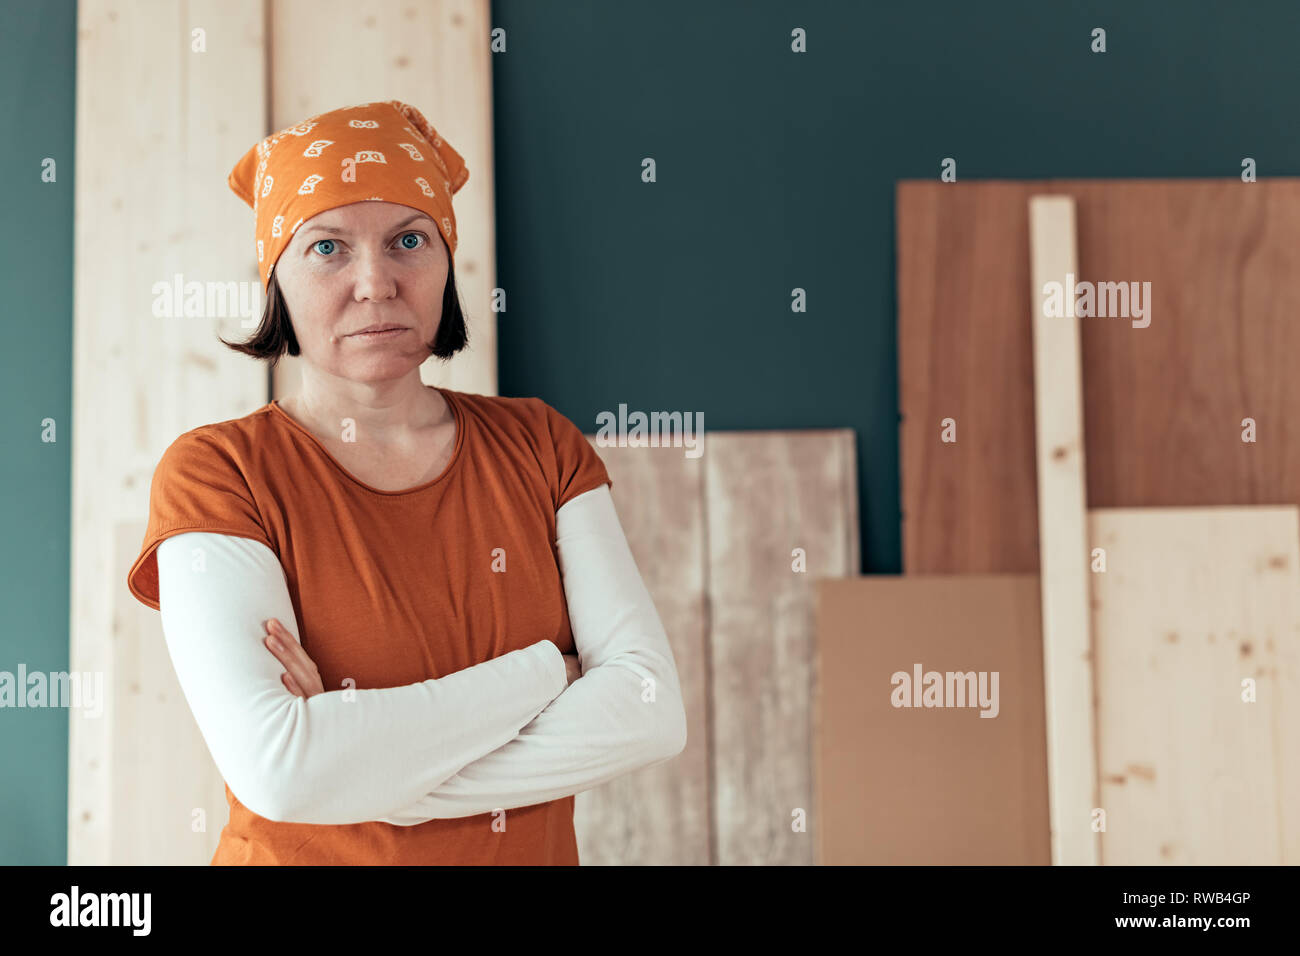 Confident self employed female carpenter portrait in her small business woodwork workshop Stock Photo